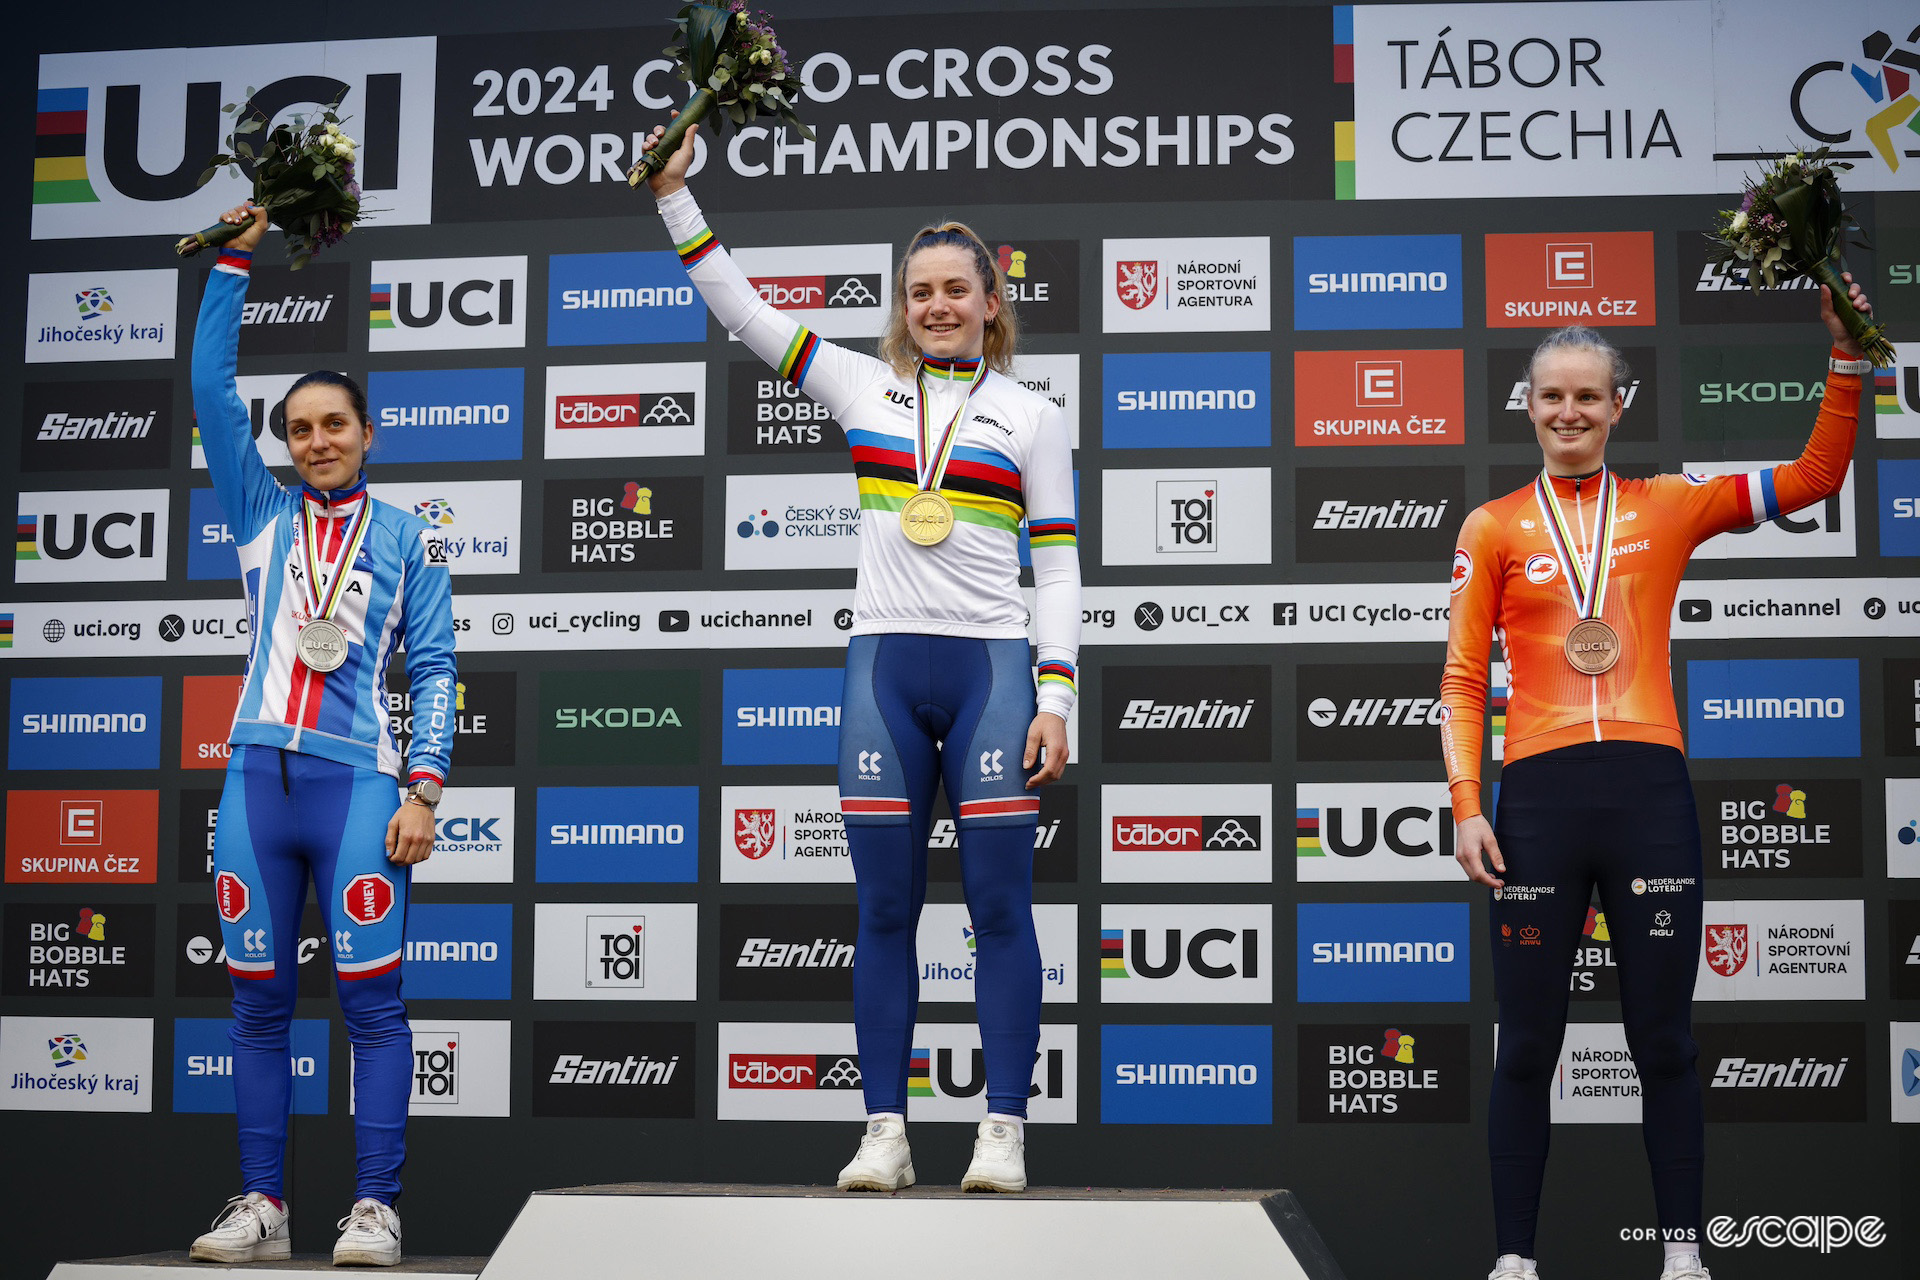 The under-23 women's podium at the 2024 Cyclocross World Championships in Tábor.